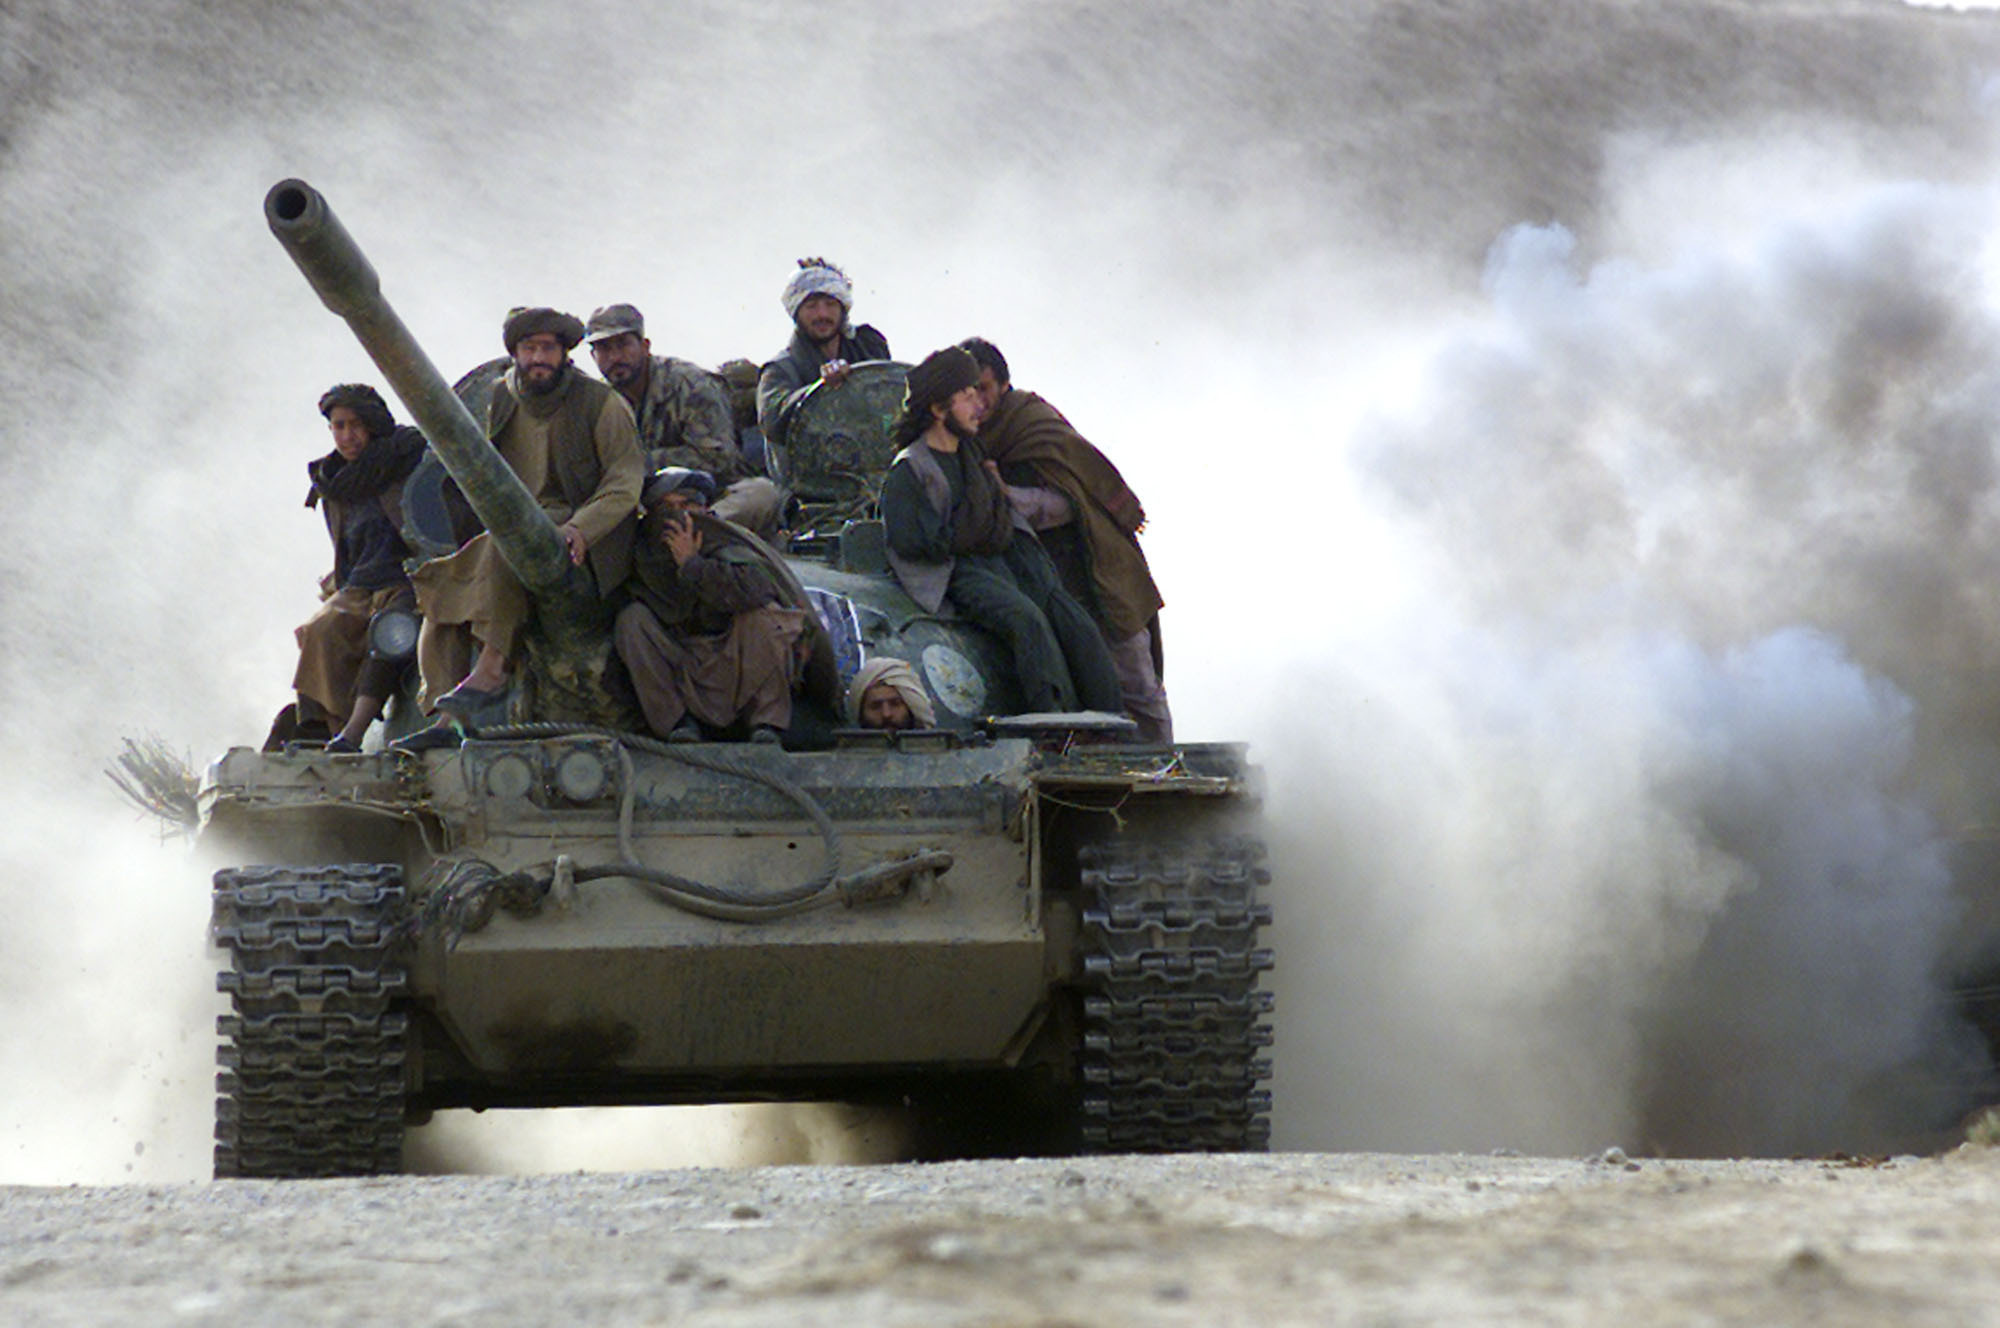 Defecting Taliban fighters sit on a tank as they cross the frontline near the village of Amirabad, northern Afghanistan (2001).